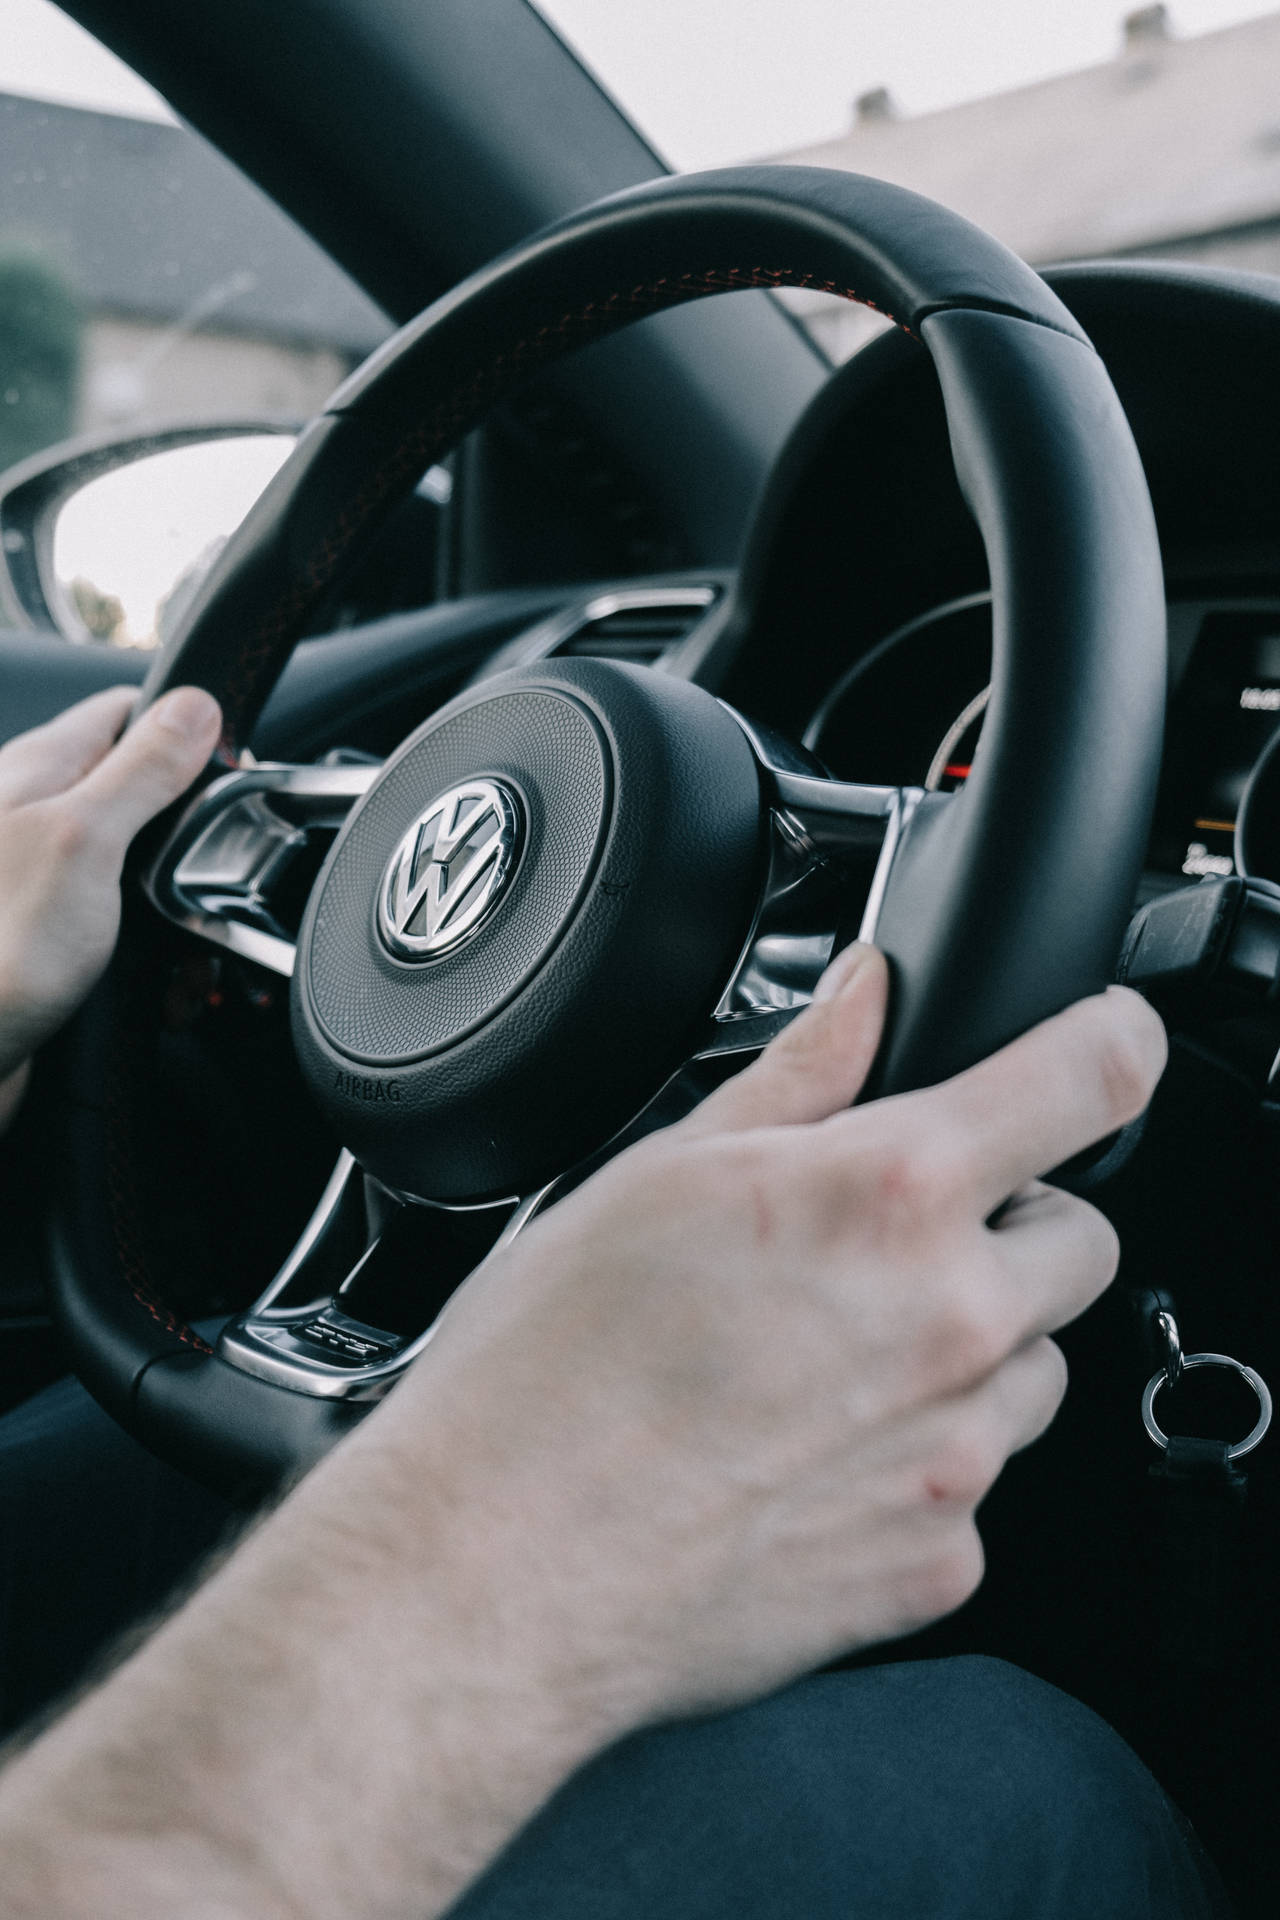 Find a harmony of your hands and the Volkswagen wheel Wallpaper